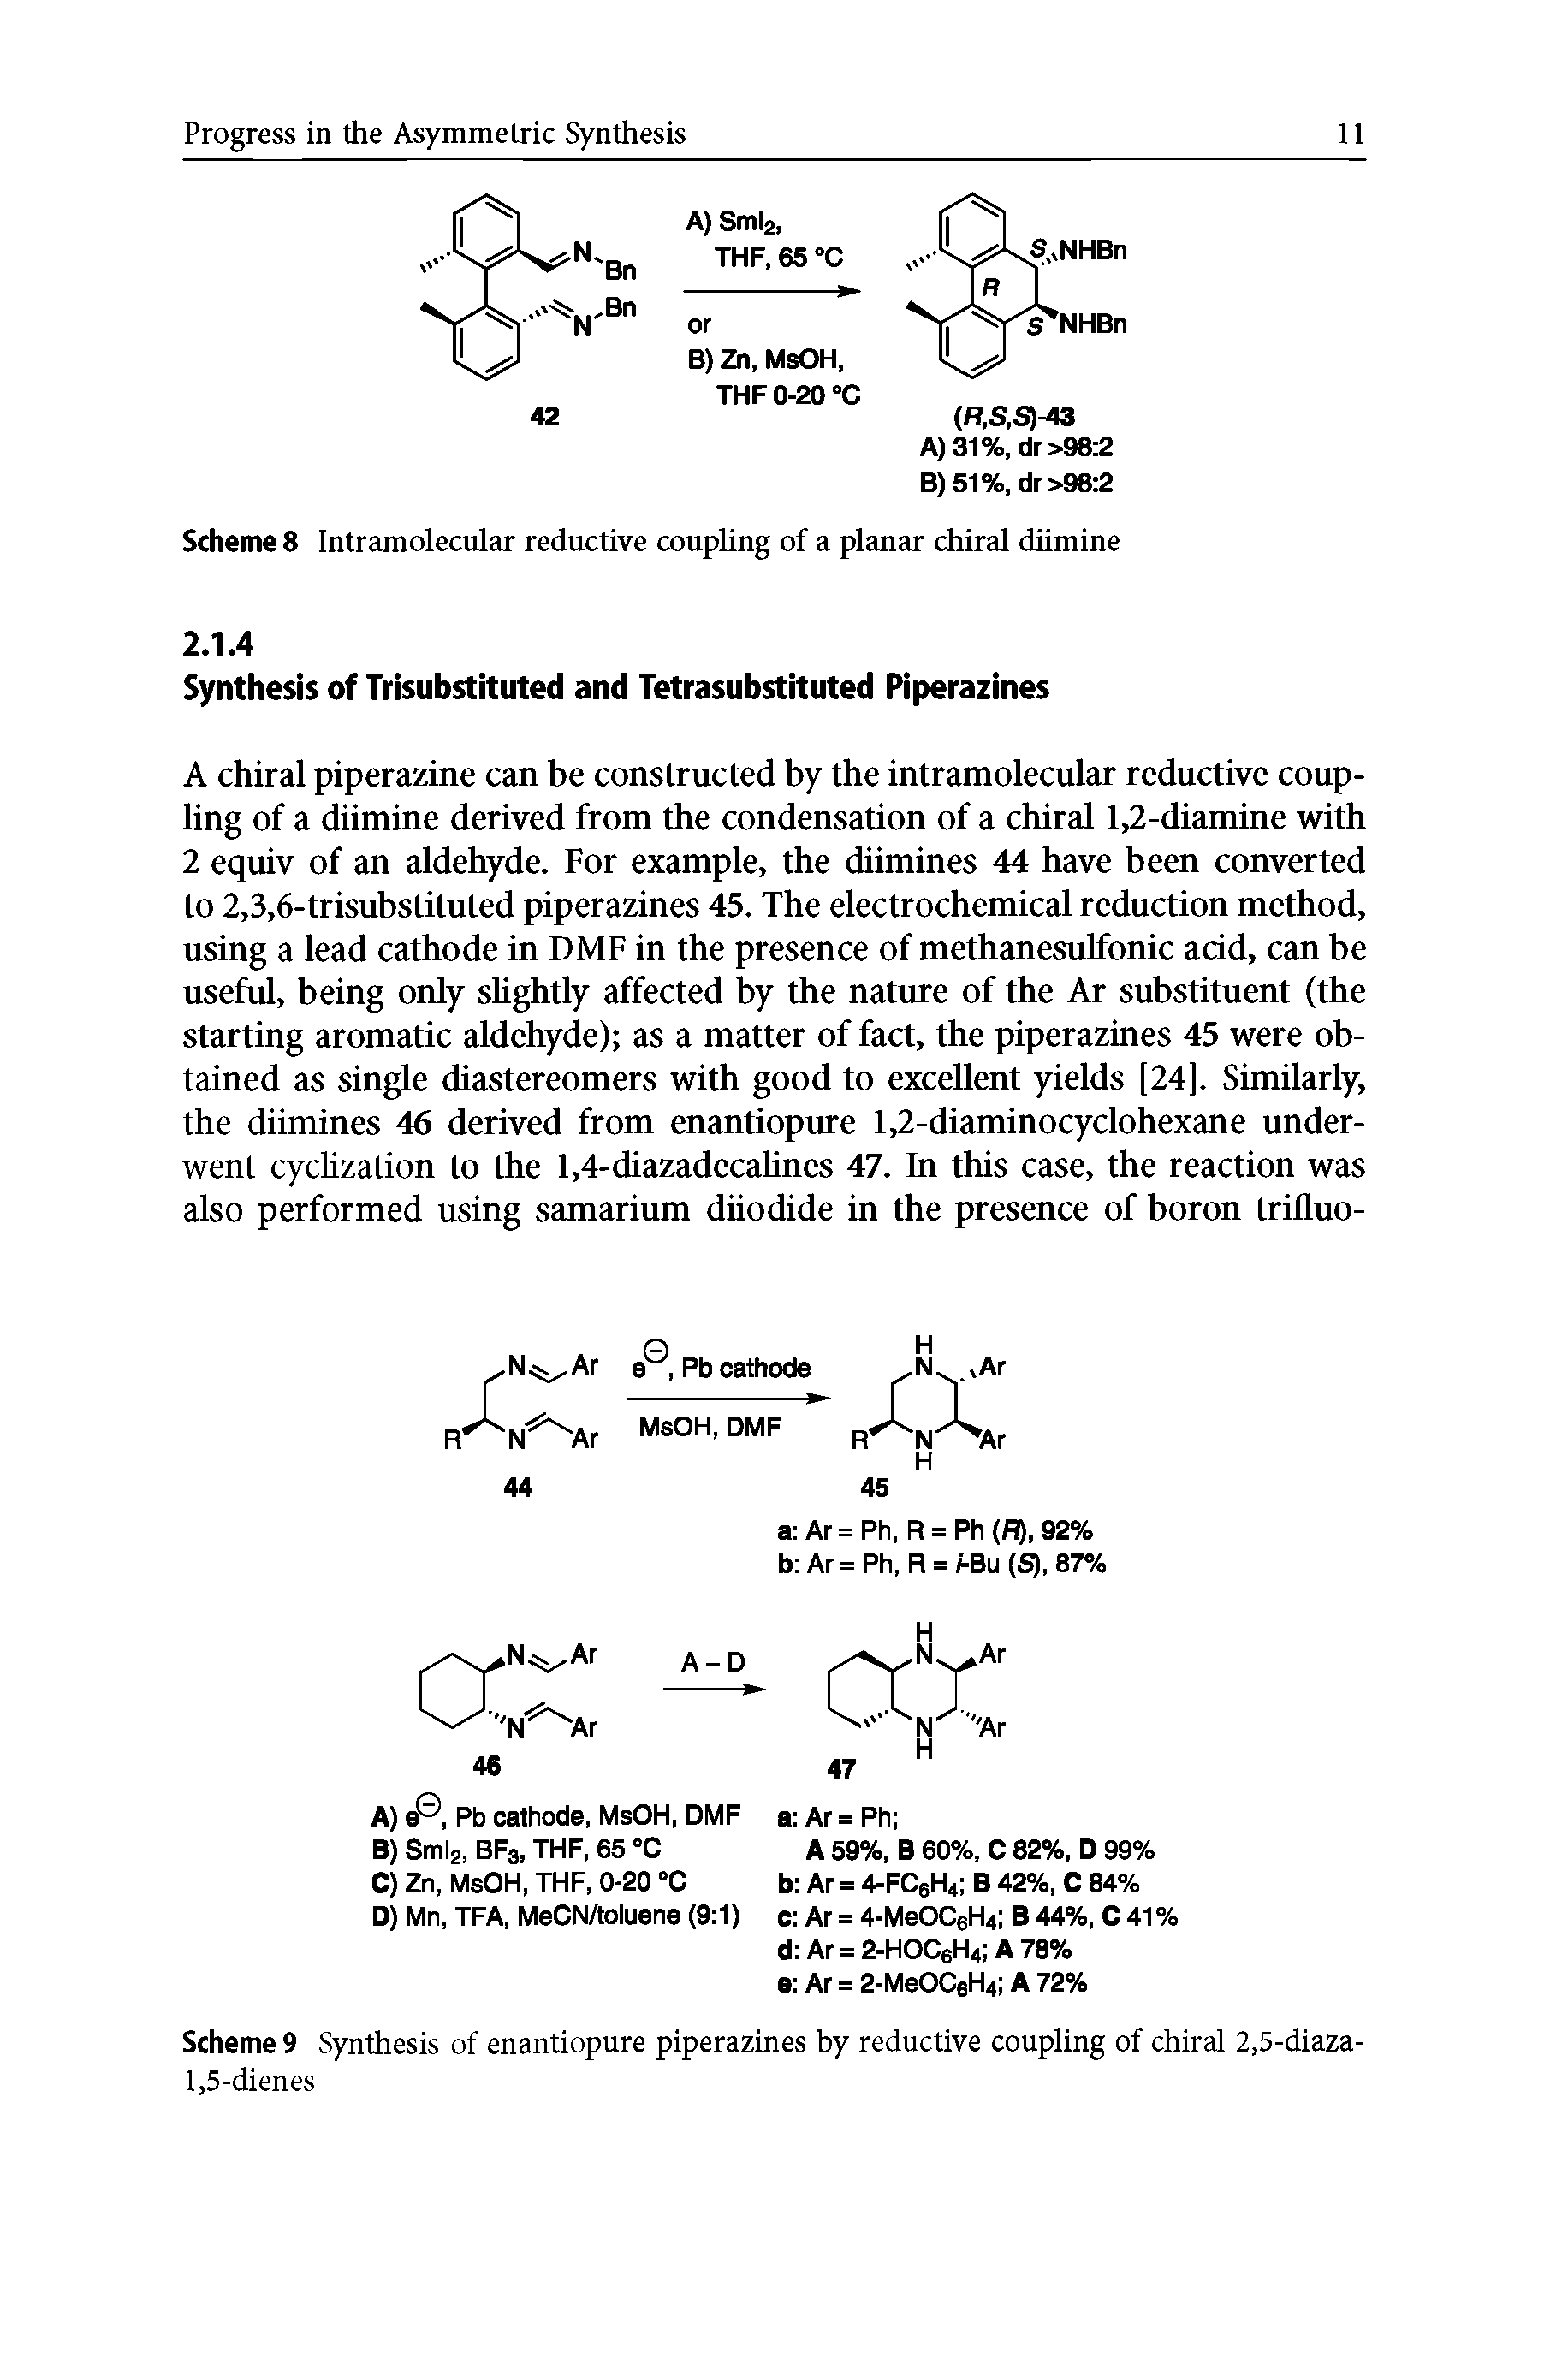 Scheme 9 Synthesis of enantiopure piperazines by reductive coupling of chiral 2,5-diaza-1,5-dienes...